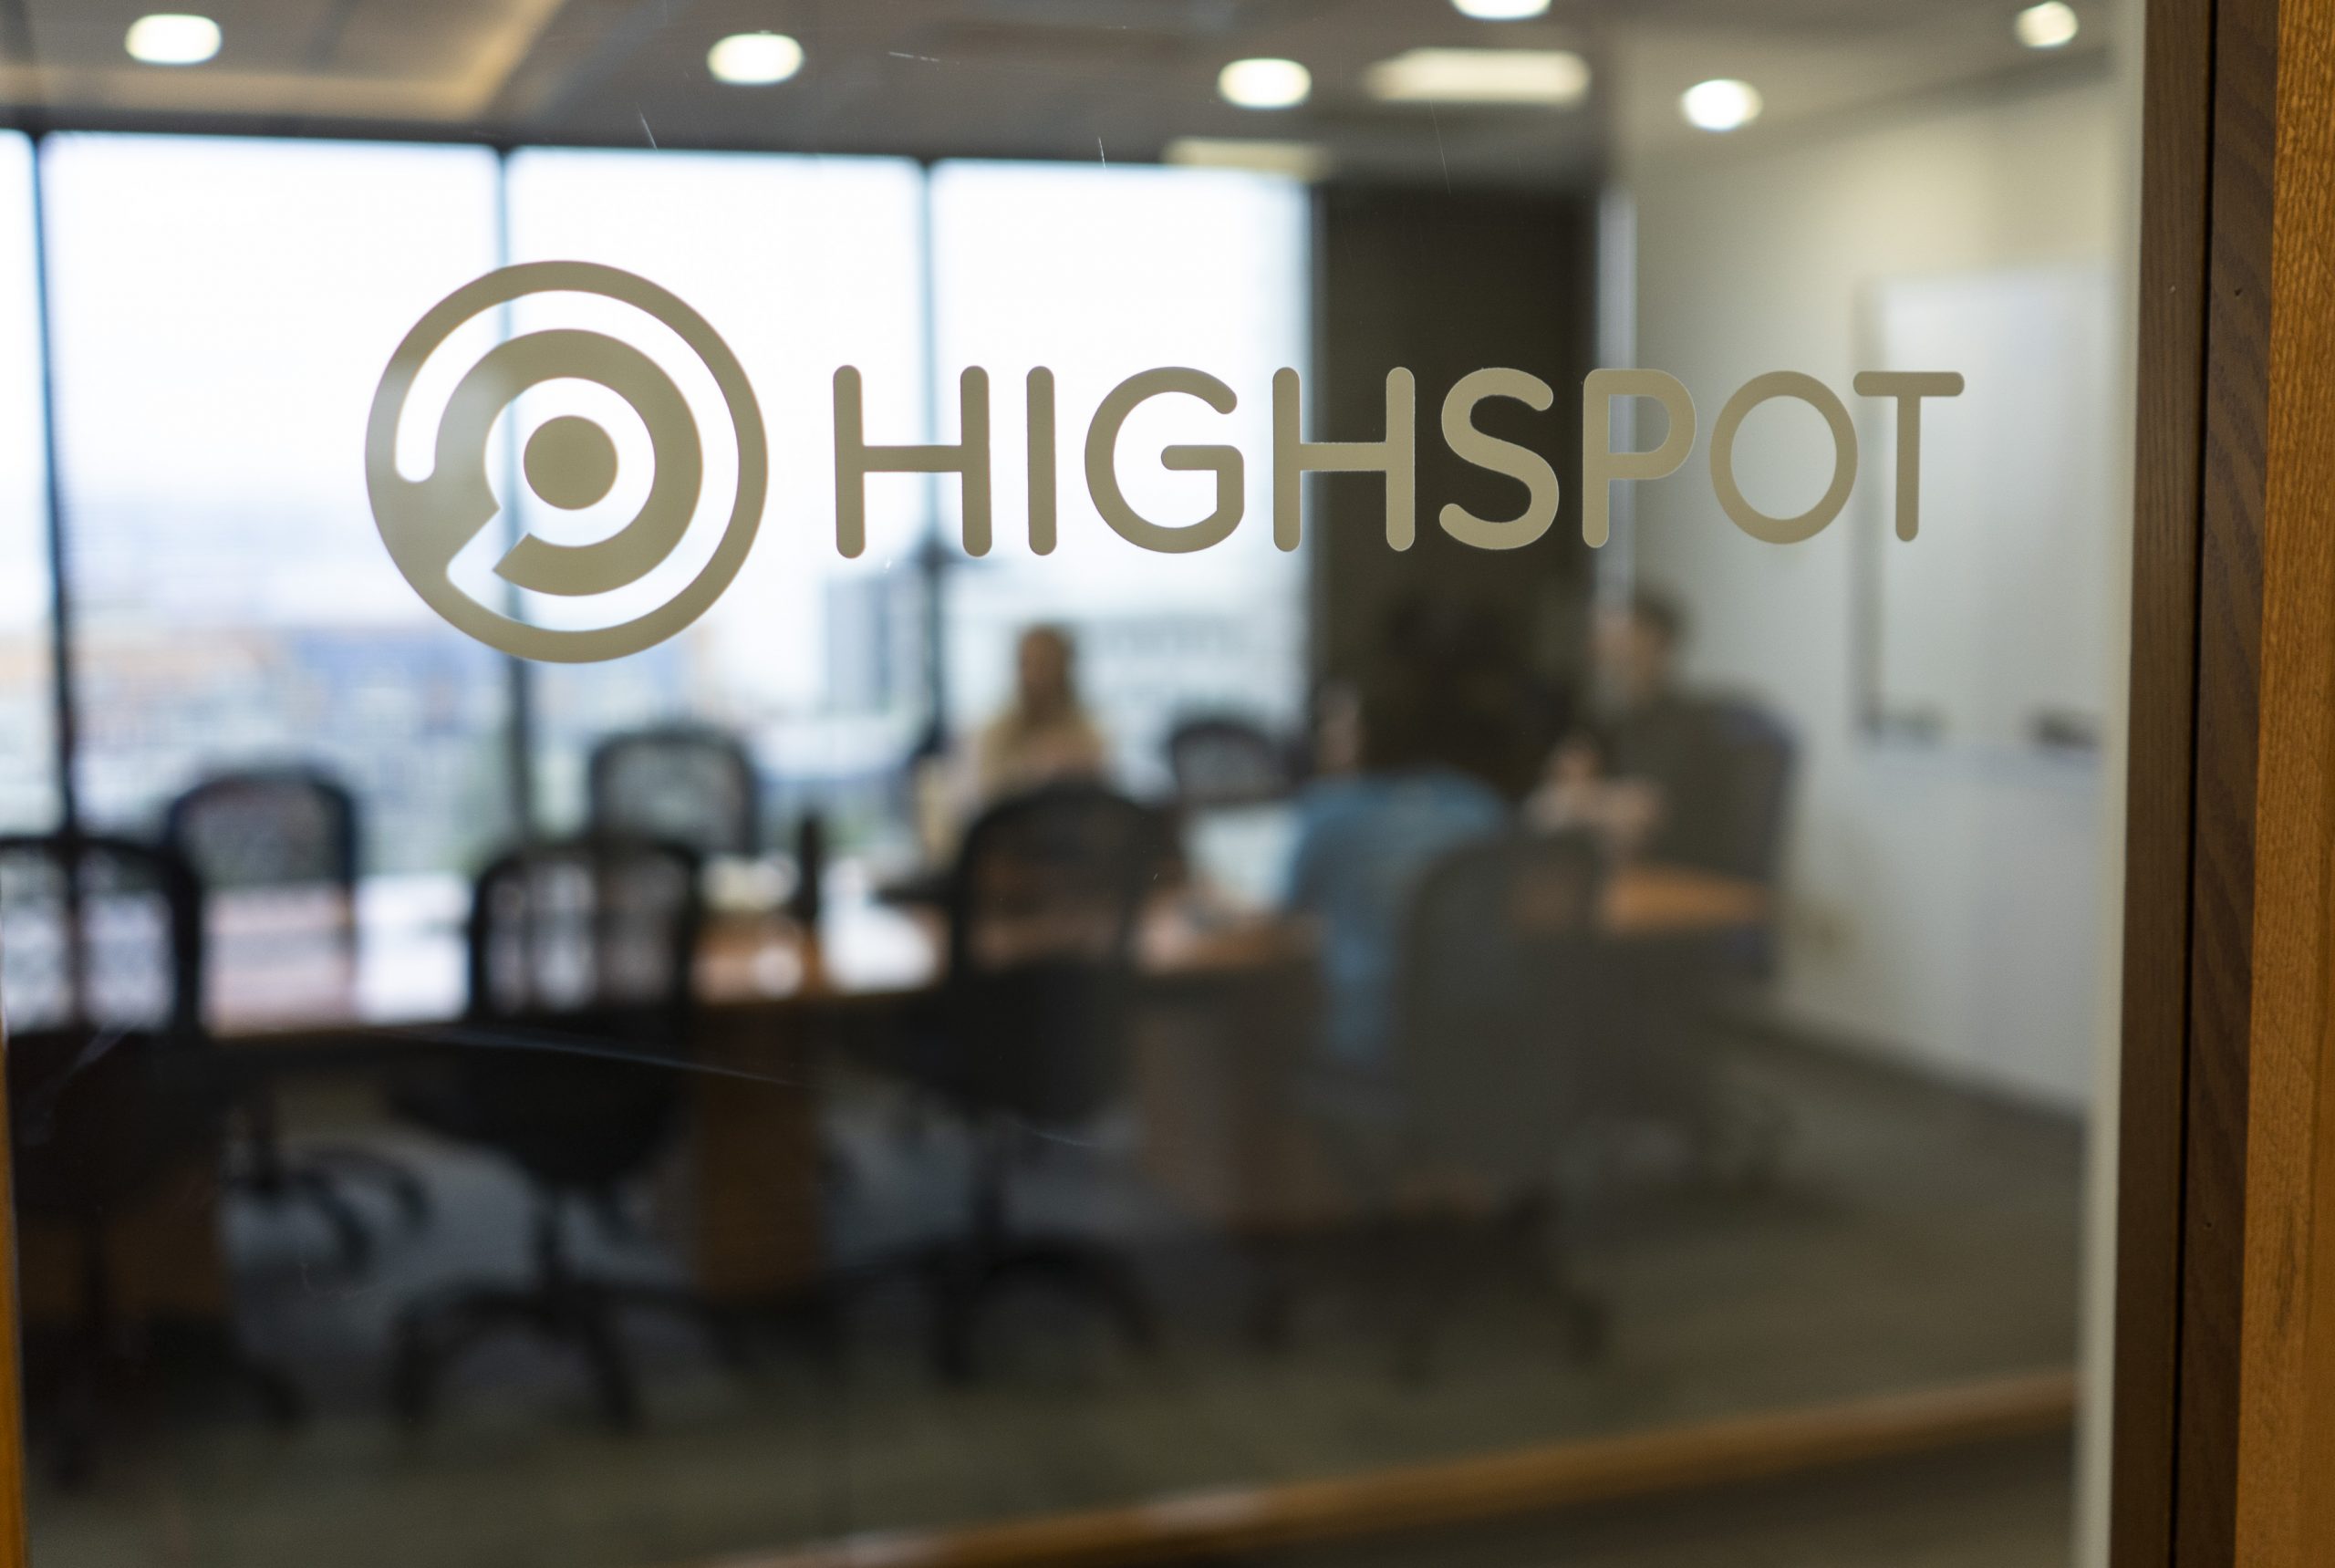 Another unicorn in Seattle: Enterprise sales startup Highspot raises $200M round at a $2.3B valuation